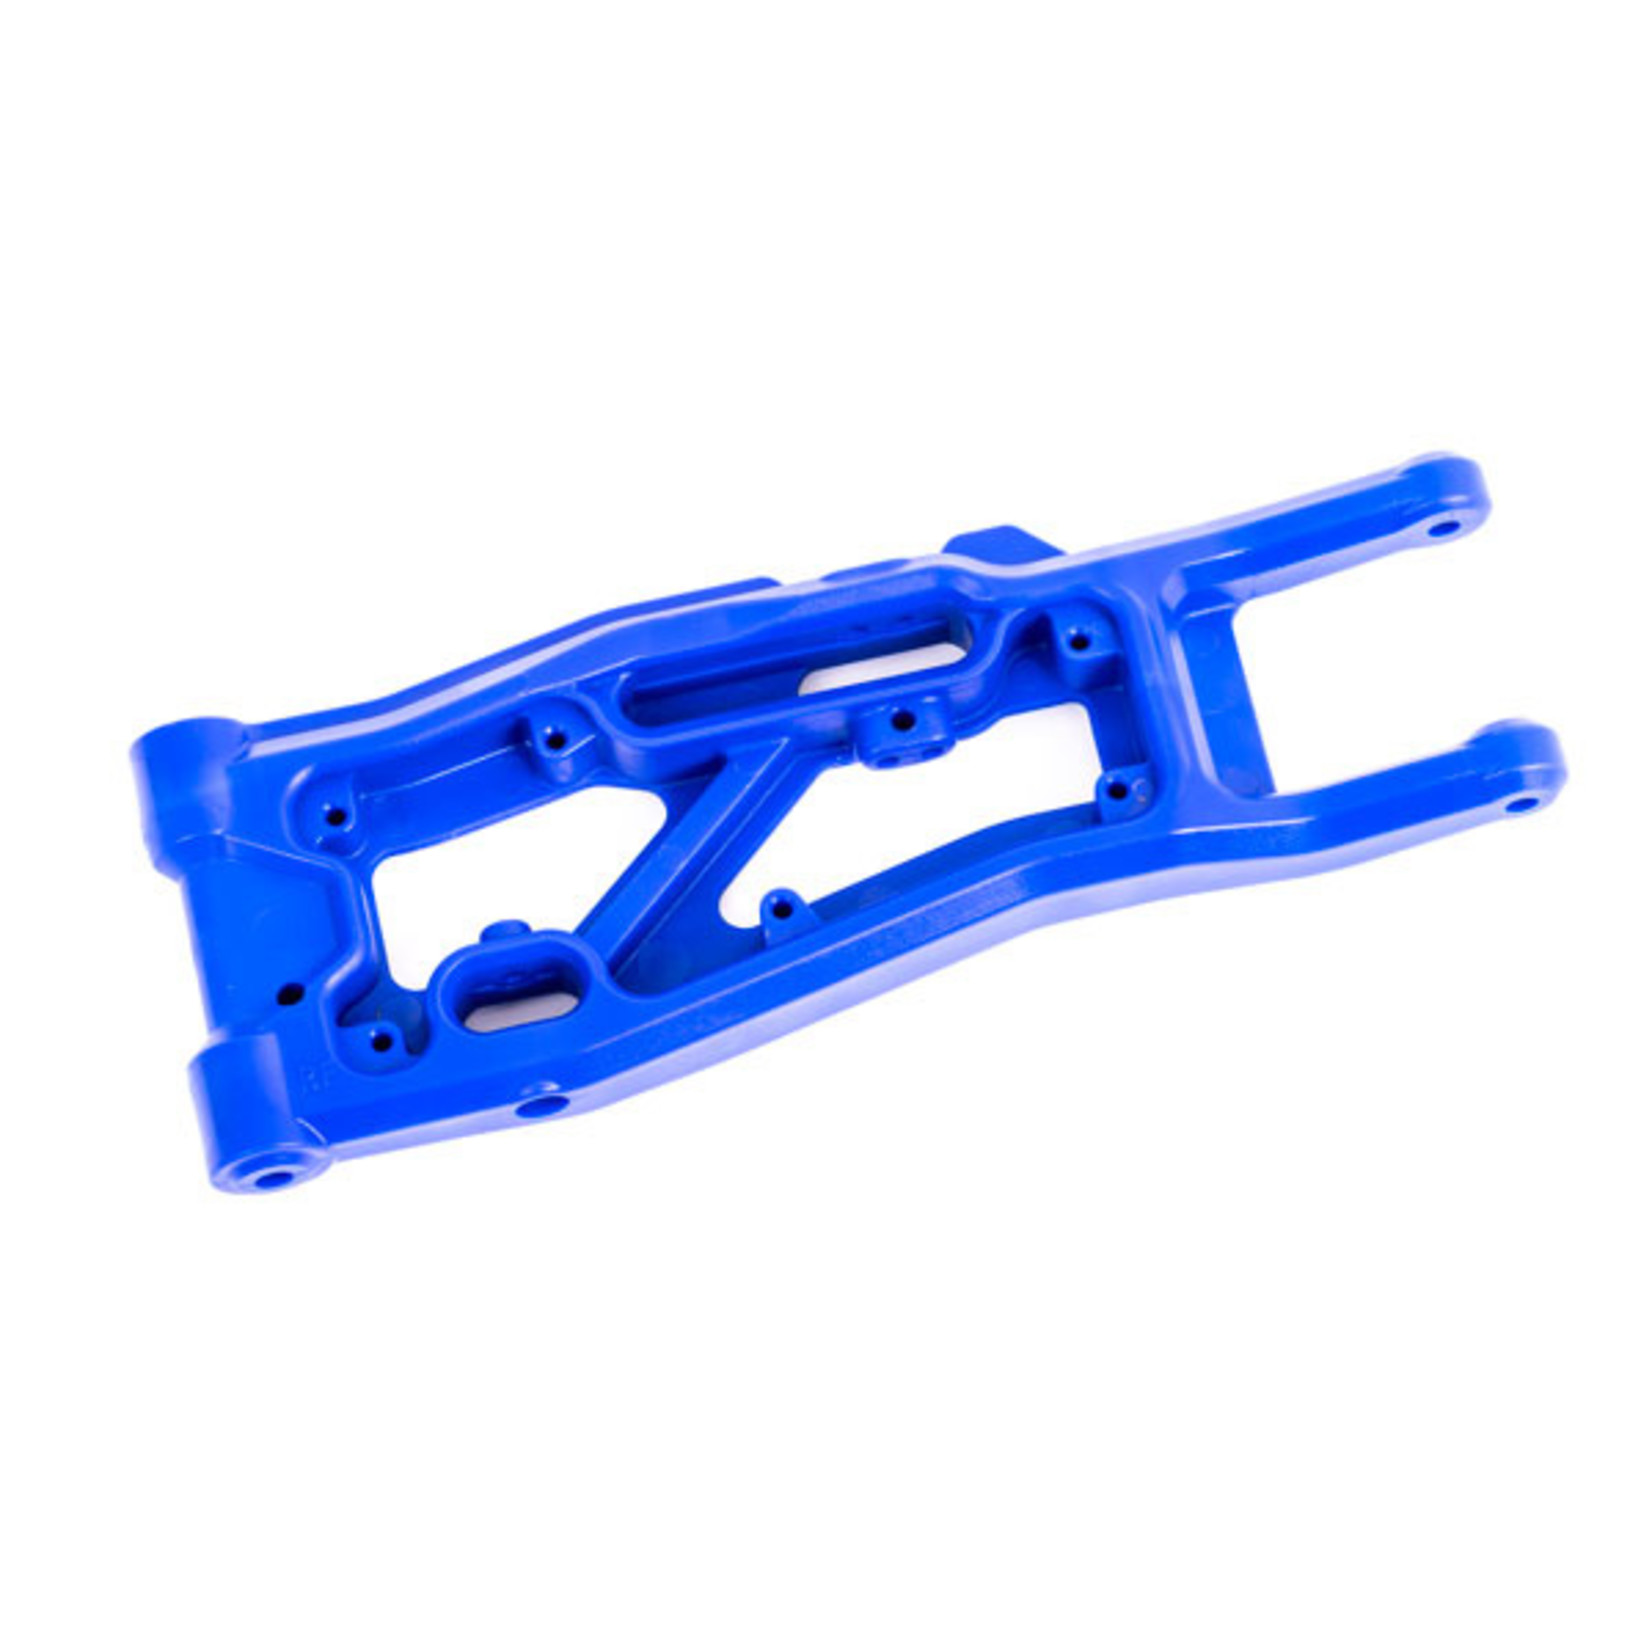 Traxxas 9530X - Suspension arm, front (right), blue